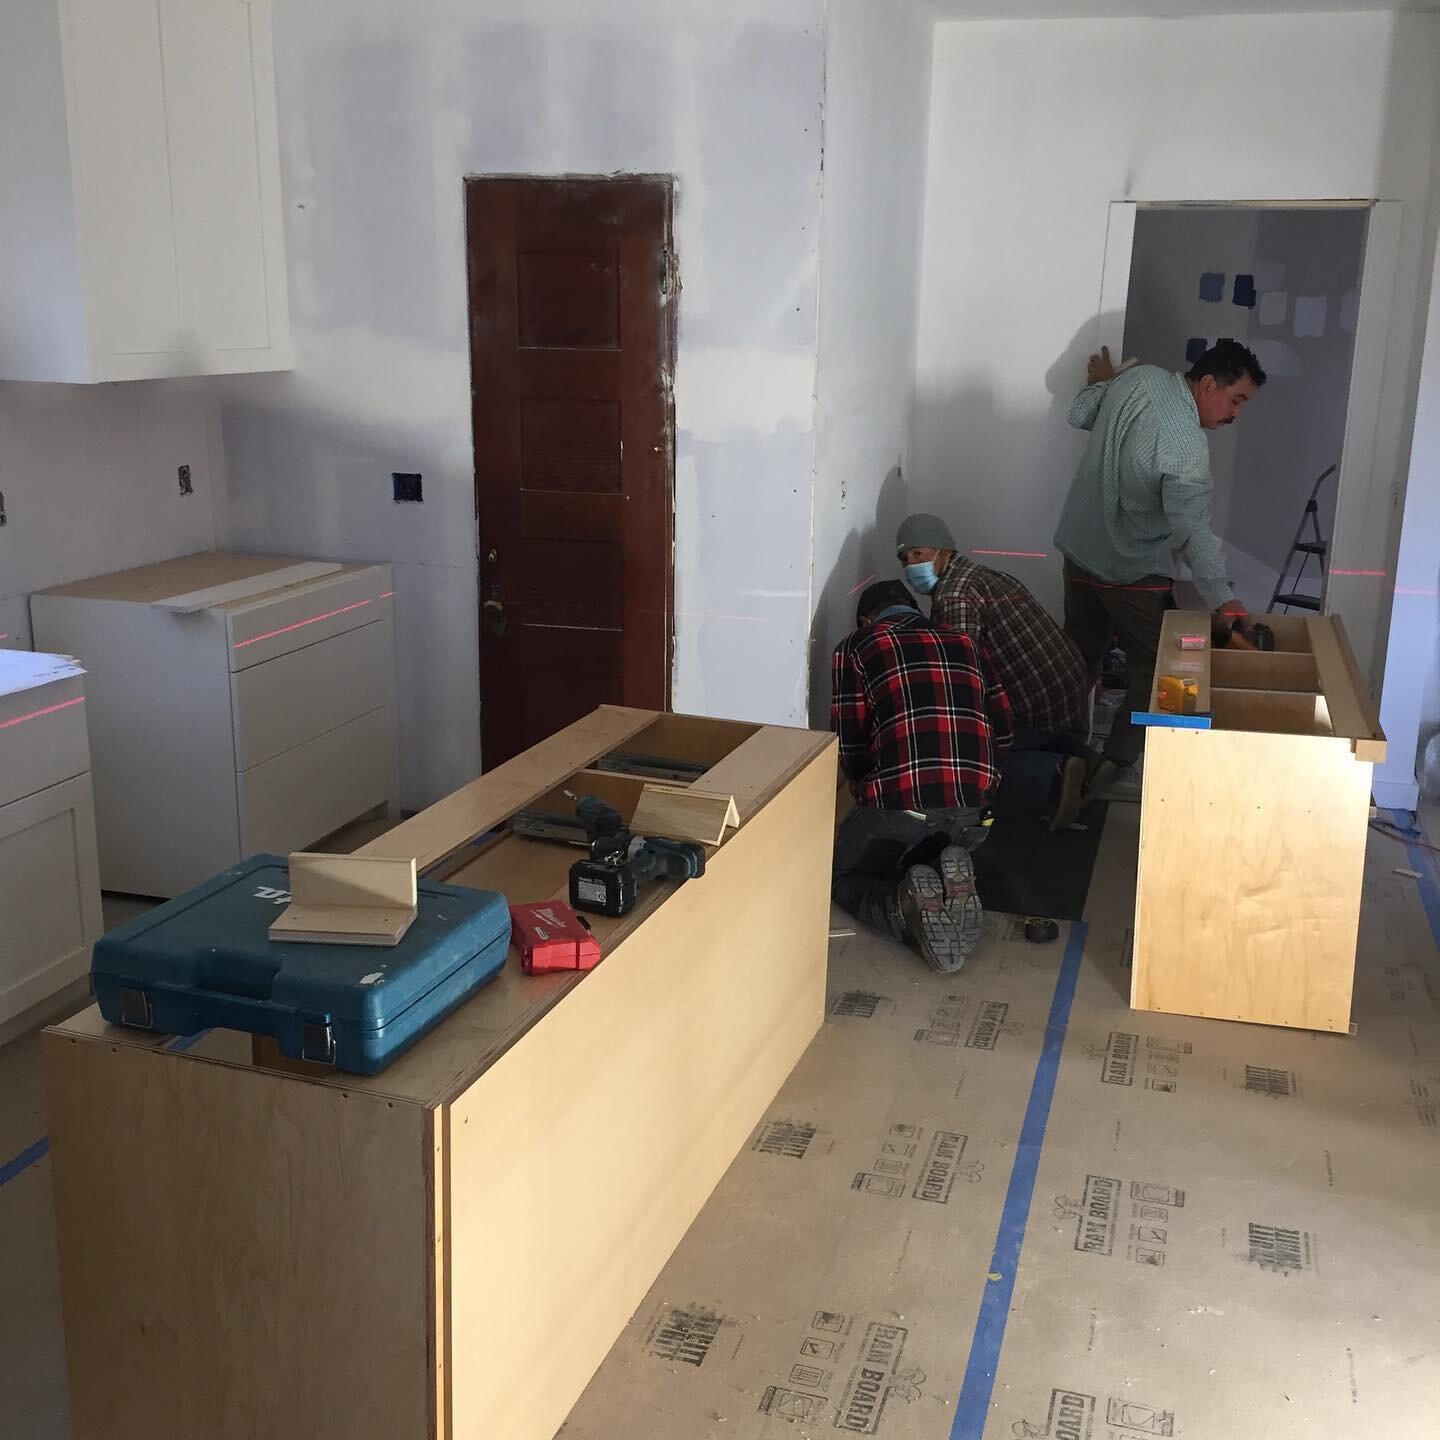 Install day for our white oak kitchen island and floor to ceiling kitchen hutch at Spruce St in Berkeley. We will install he doors, drawers and paneling after things have mellowed on site to avoid damage. Great design by @nickscapes and work by @theo